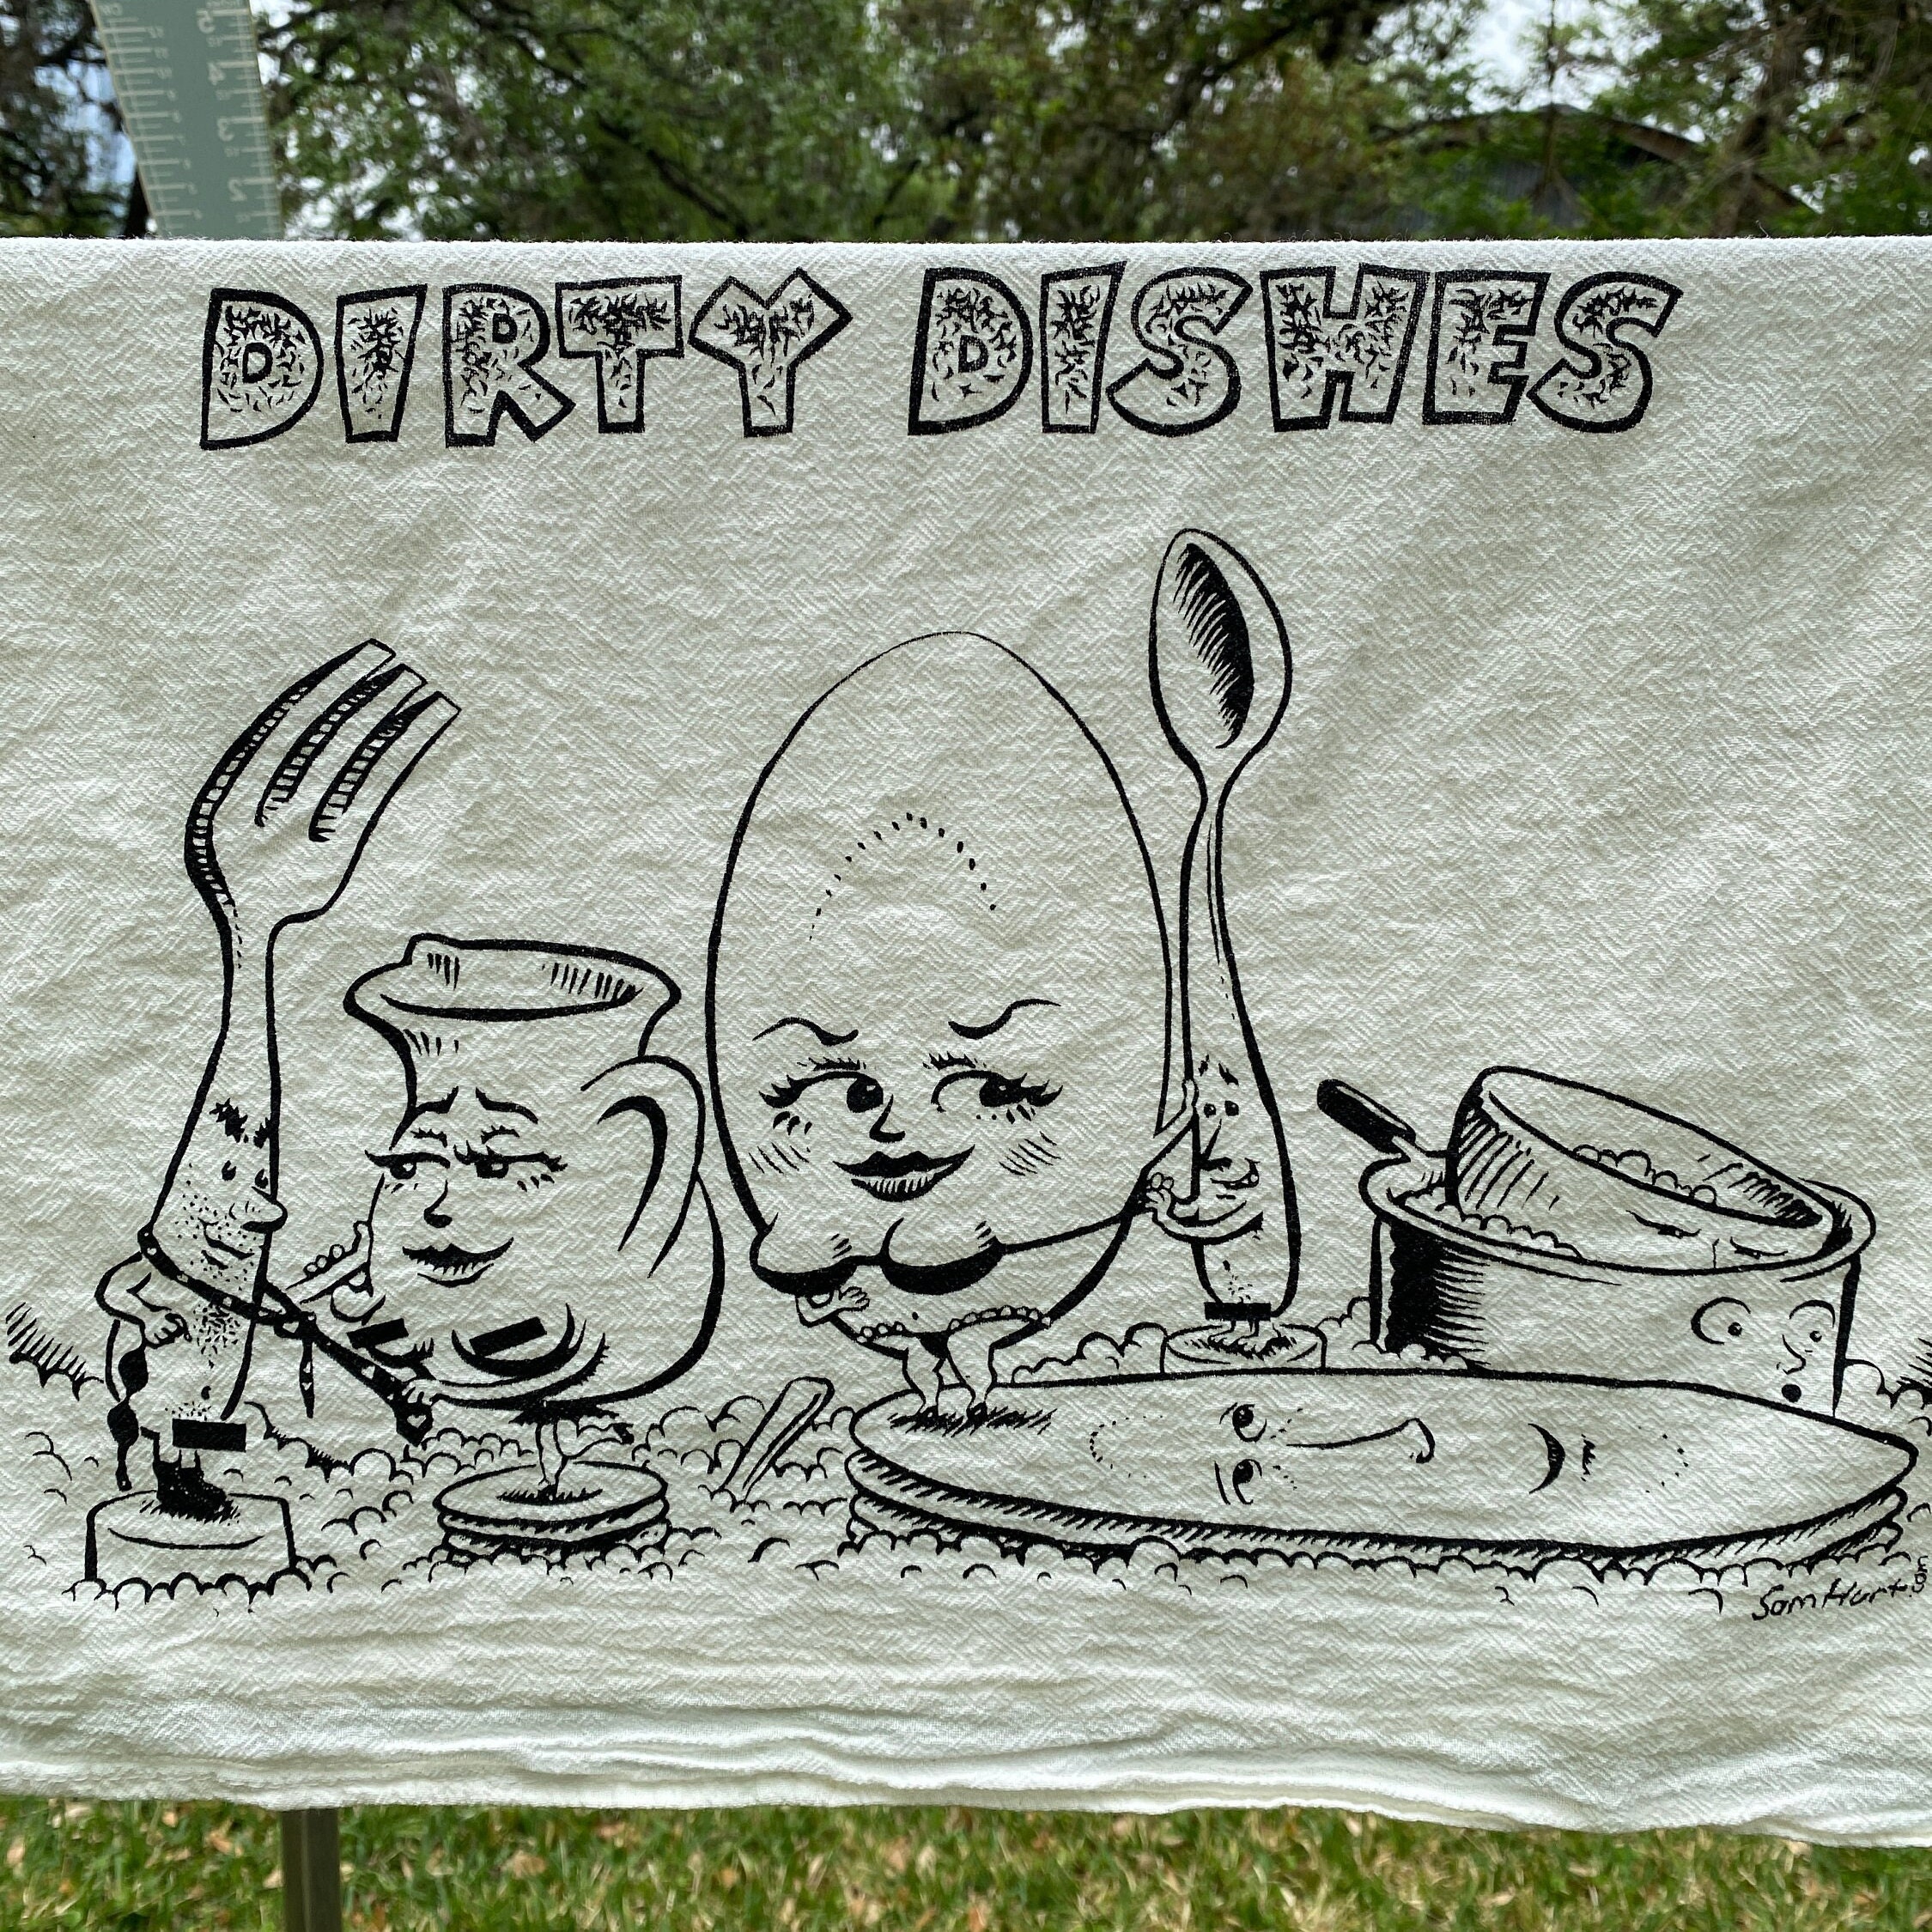 Dirty Dishes Funny Tea Towel – Designing Moments